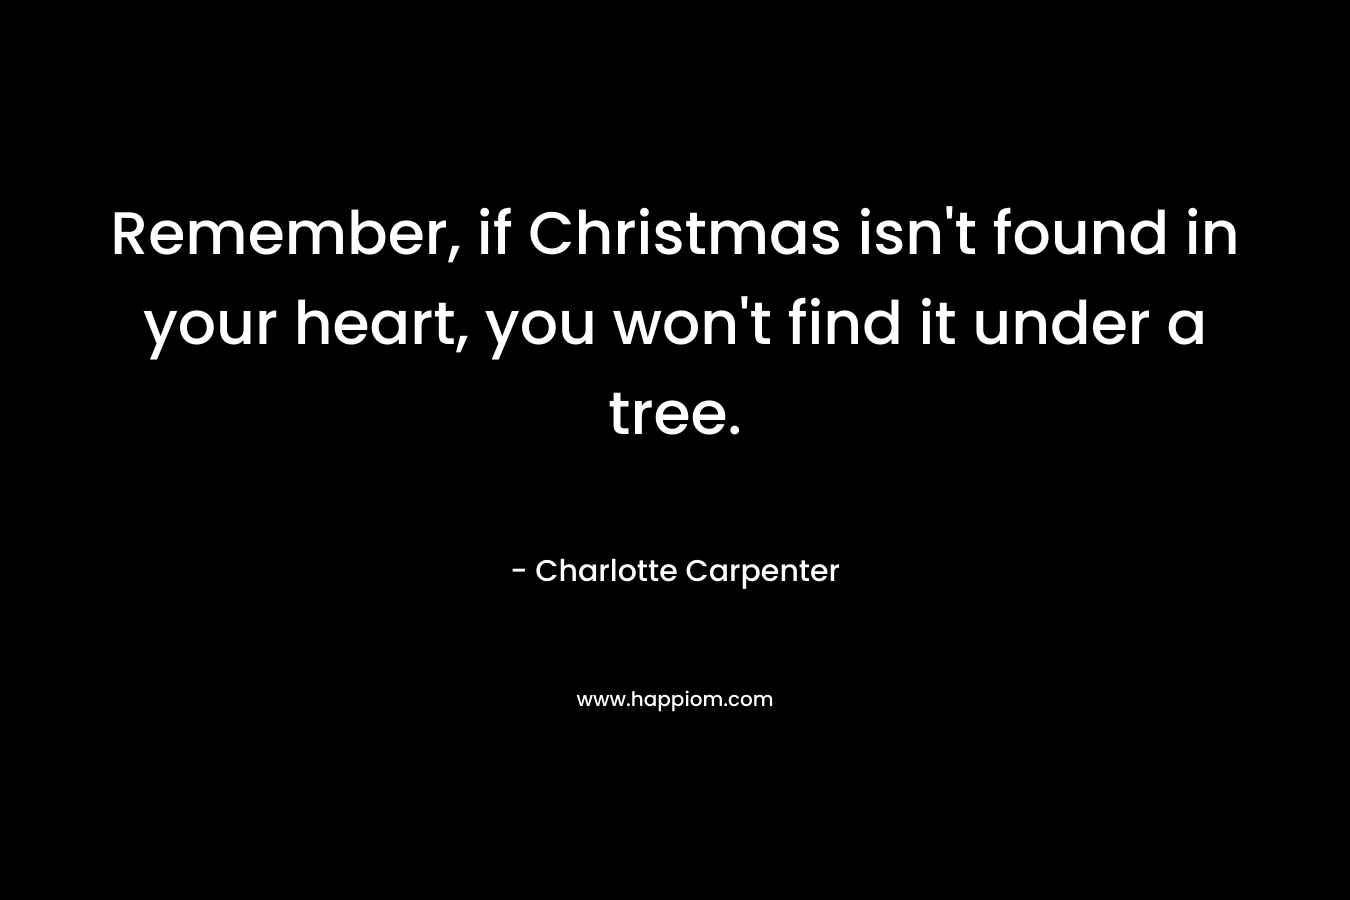 Remember, if Christmas isn’t found in your heart, you won’t find it under a tree. – Charlotte Carpenter